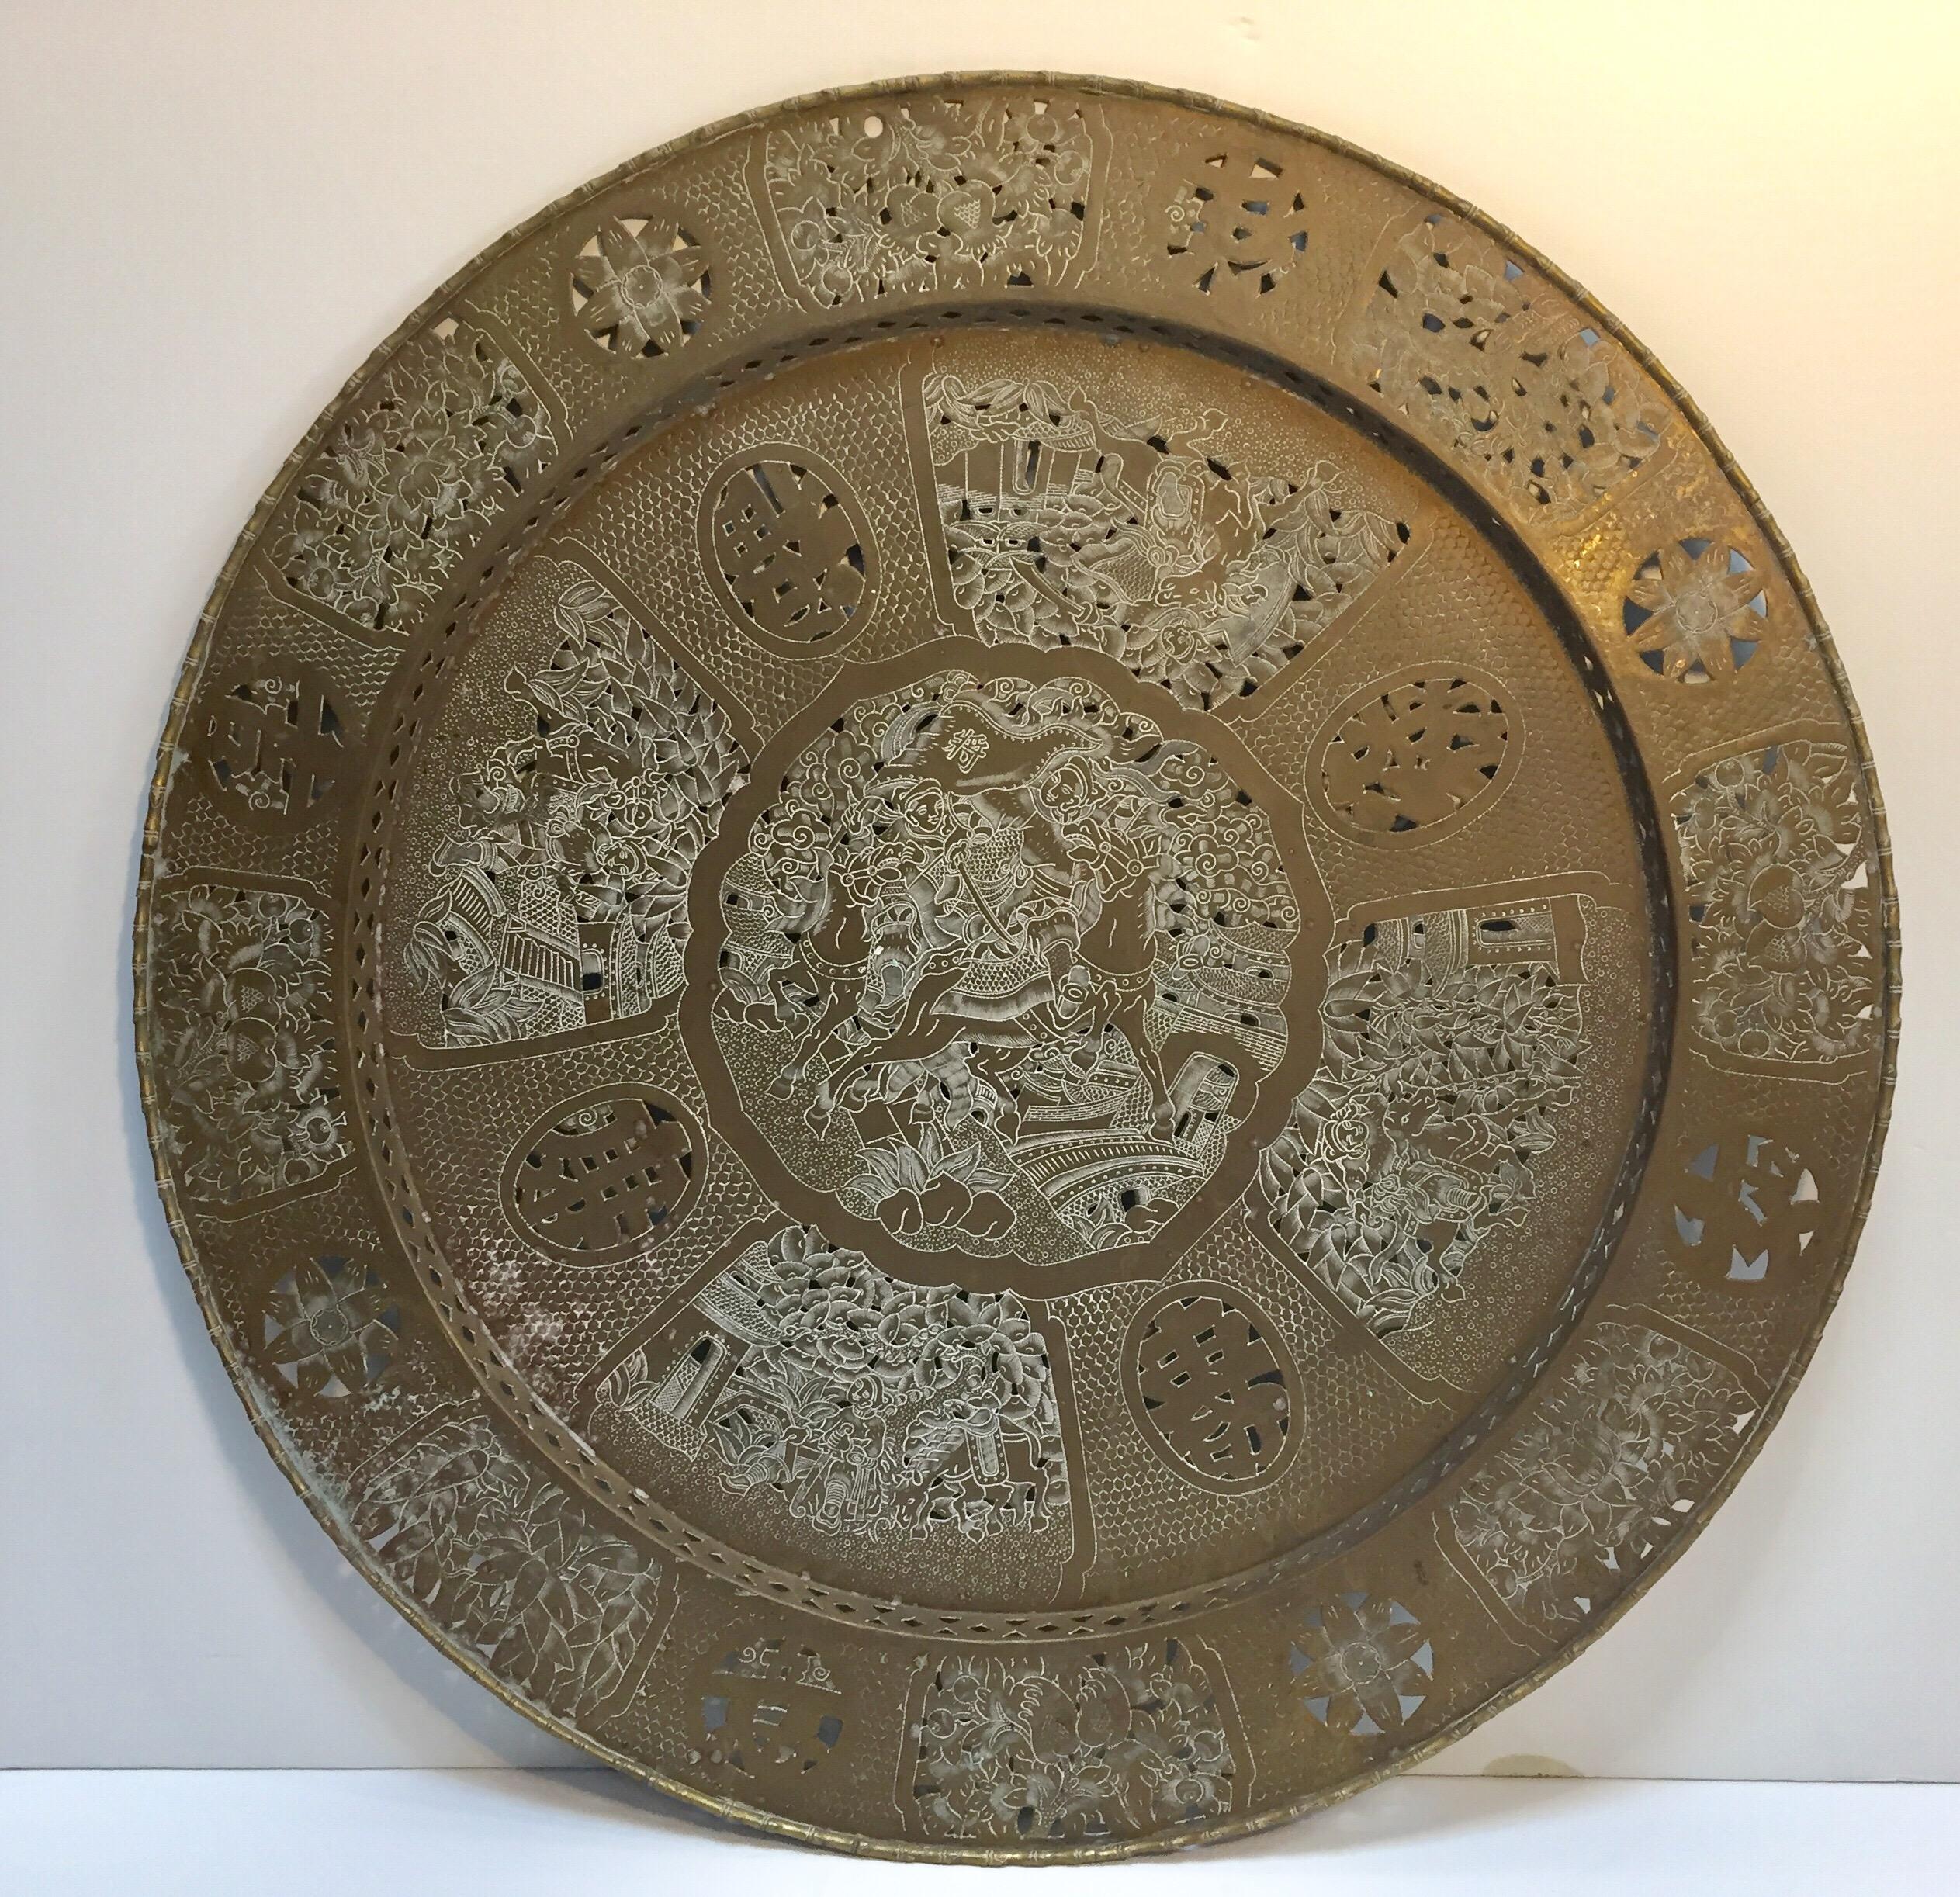 Collector piece, Chinese imports metal brass tray, hammered and chiseled, engraved and handcut designs In the middle there is a scene with 2 soldiers on horses, around there is dragons and different scenes of soldiers wearing antique Chinese